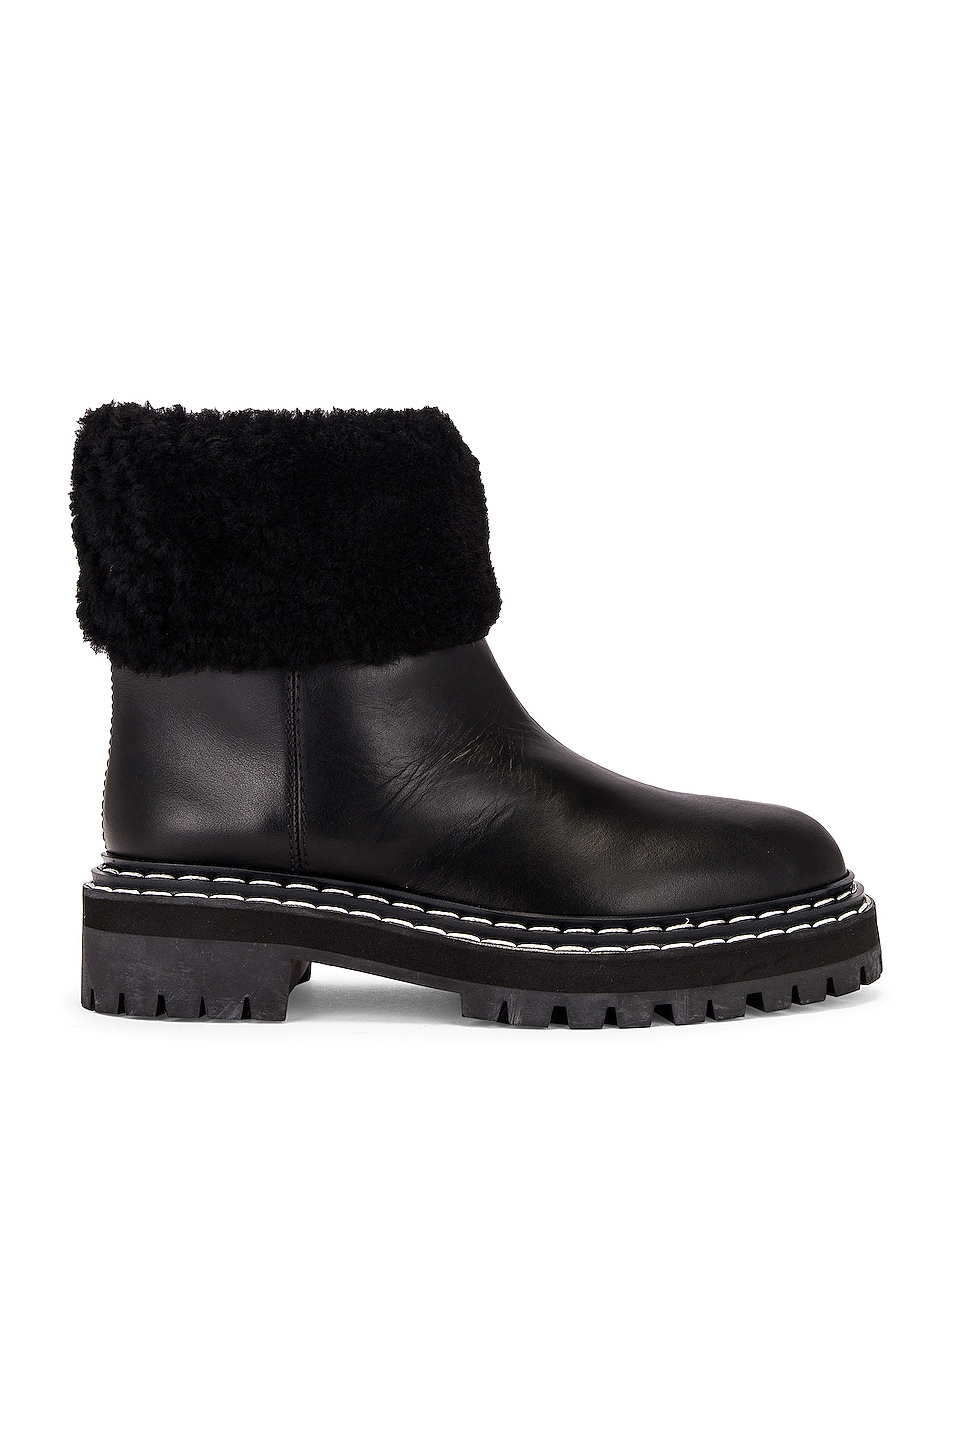 Image 1 of Proenza Schouler Lug Sole Shearling Ankle Boots in Black